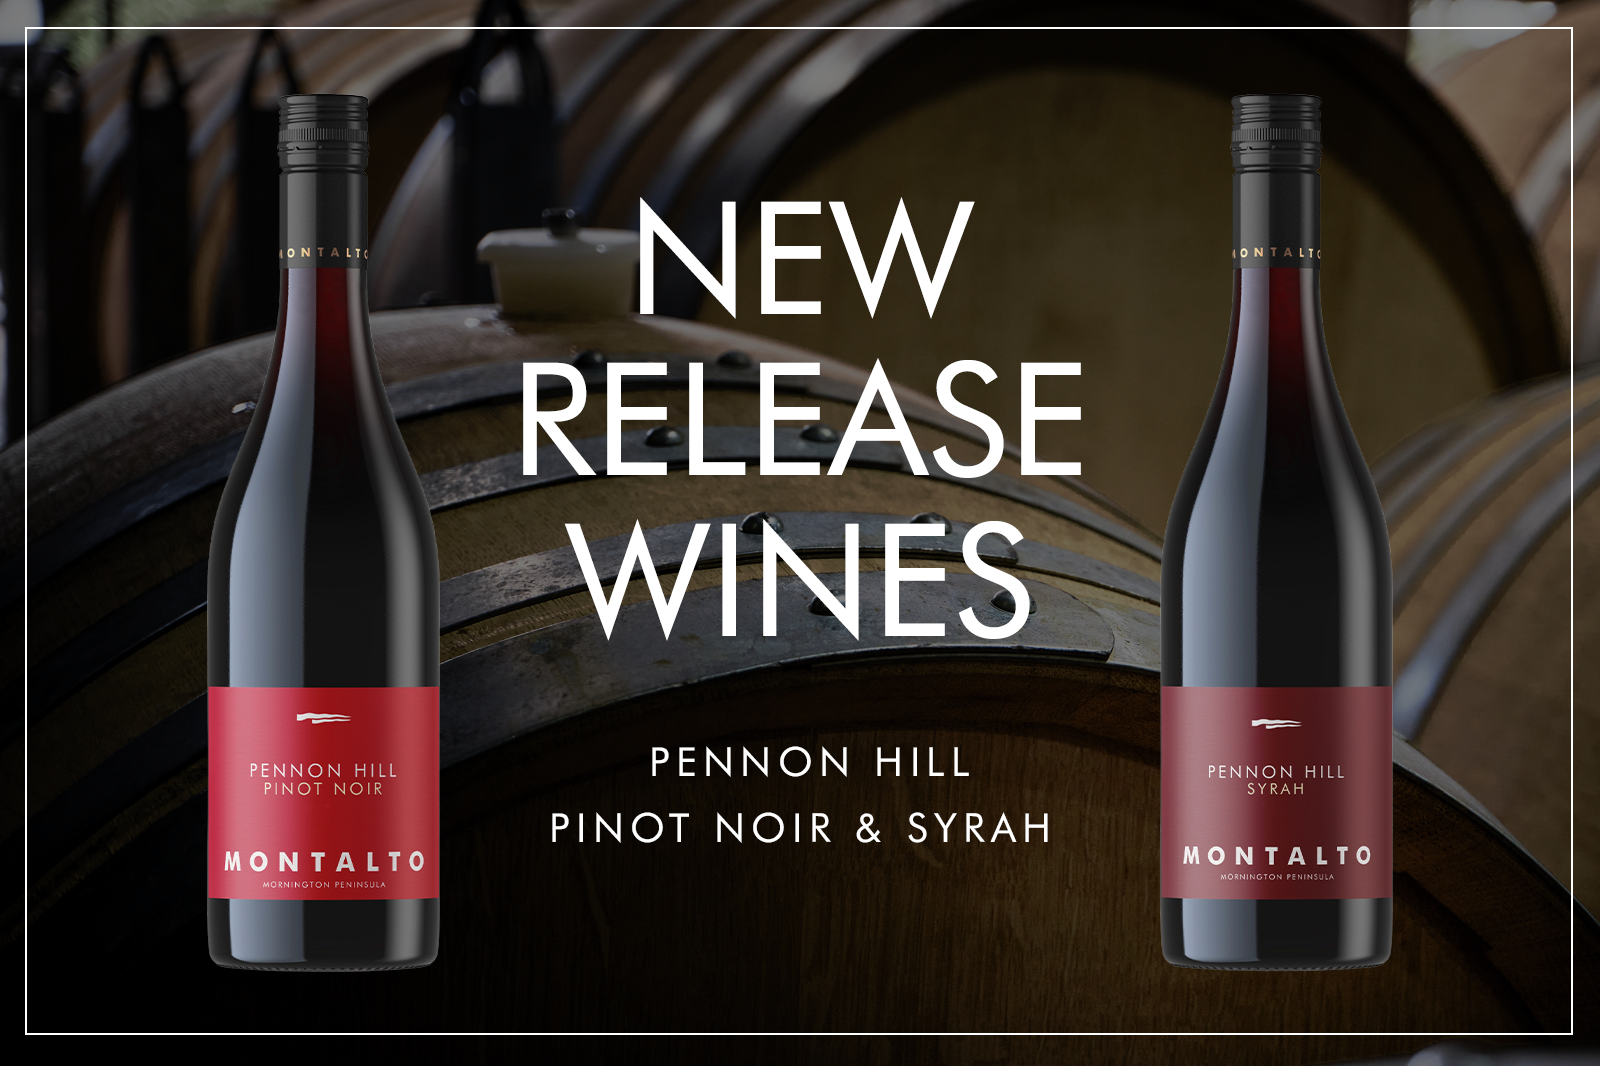 New Release Wines - 2023 Pennon Hill Pinot Noir & Syrah